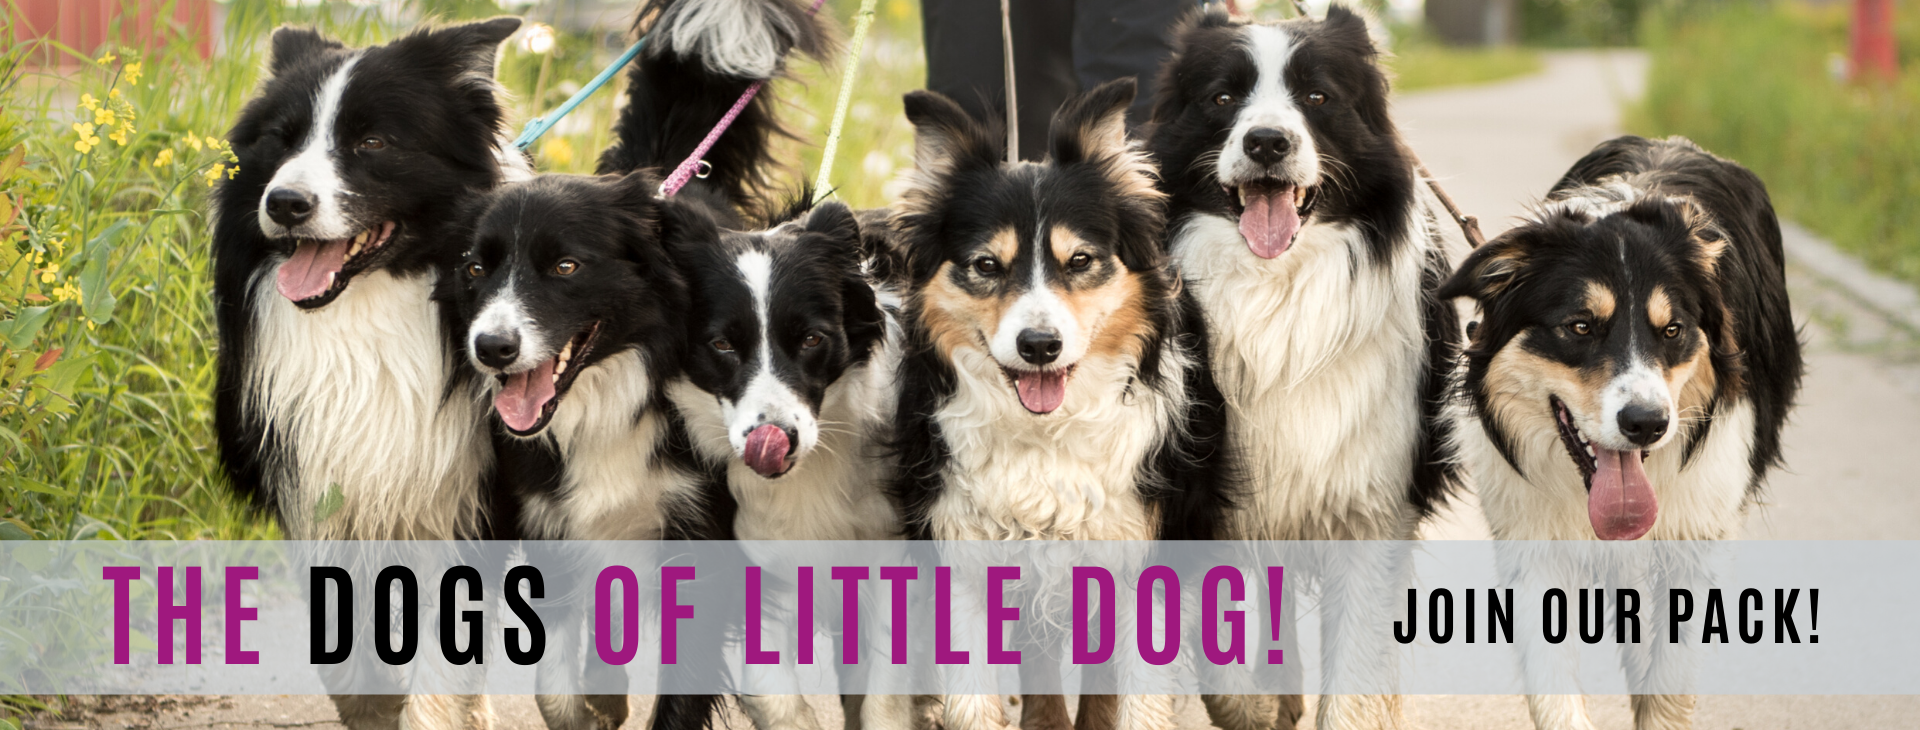 Dogs of Little Dogs